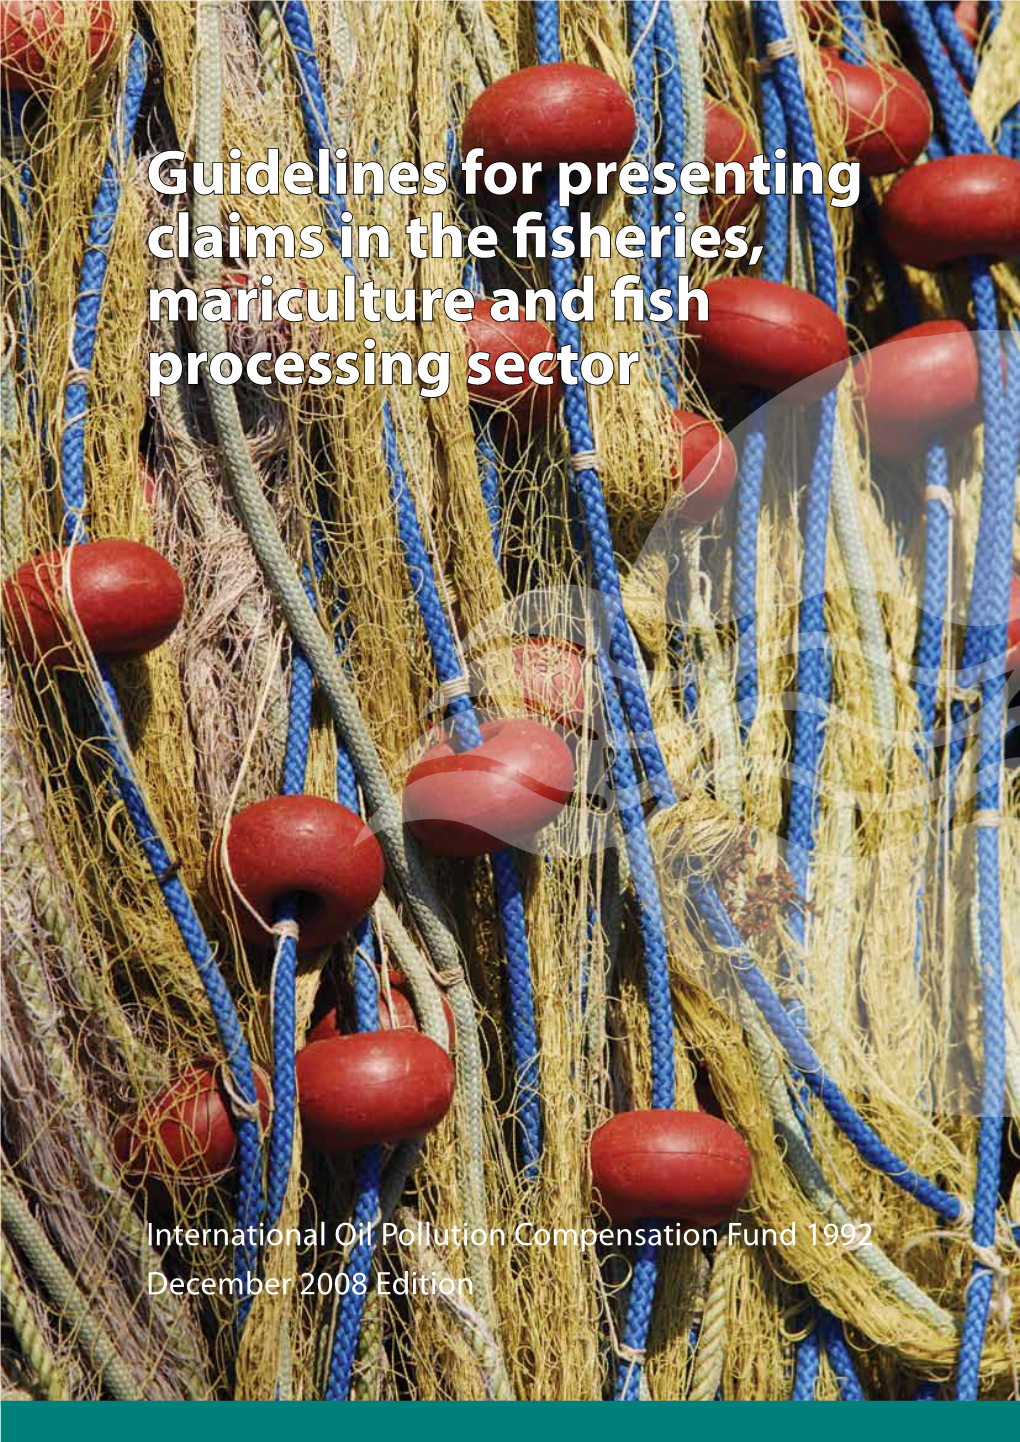 Guidelines for Presenting Claims in the Fisheries, Mariculture and Fish Processing Sector